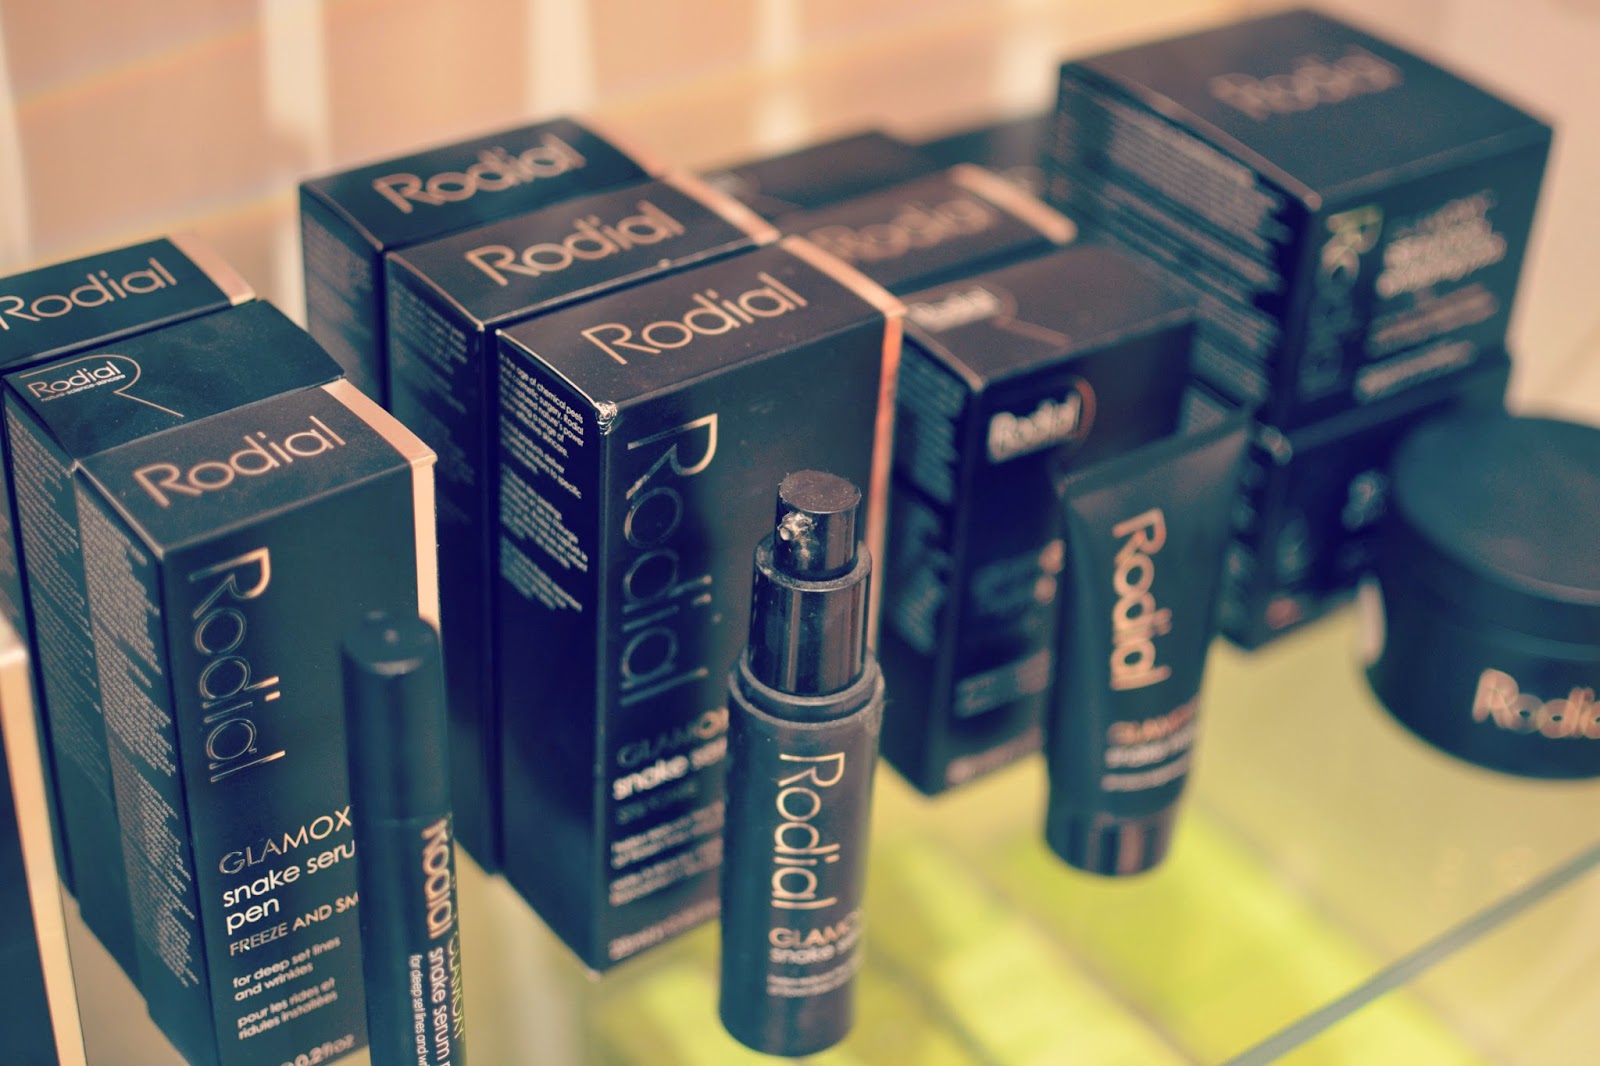 rodial products